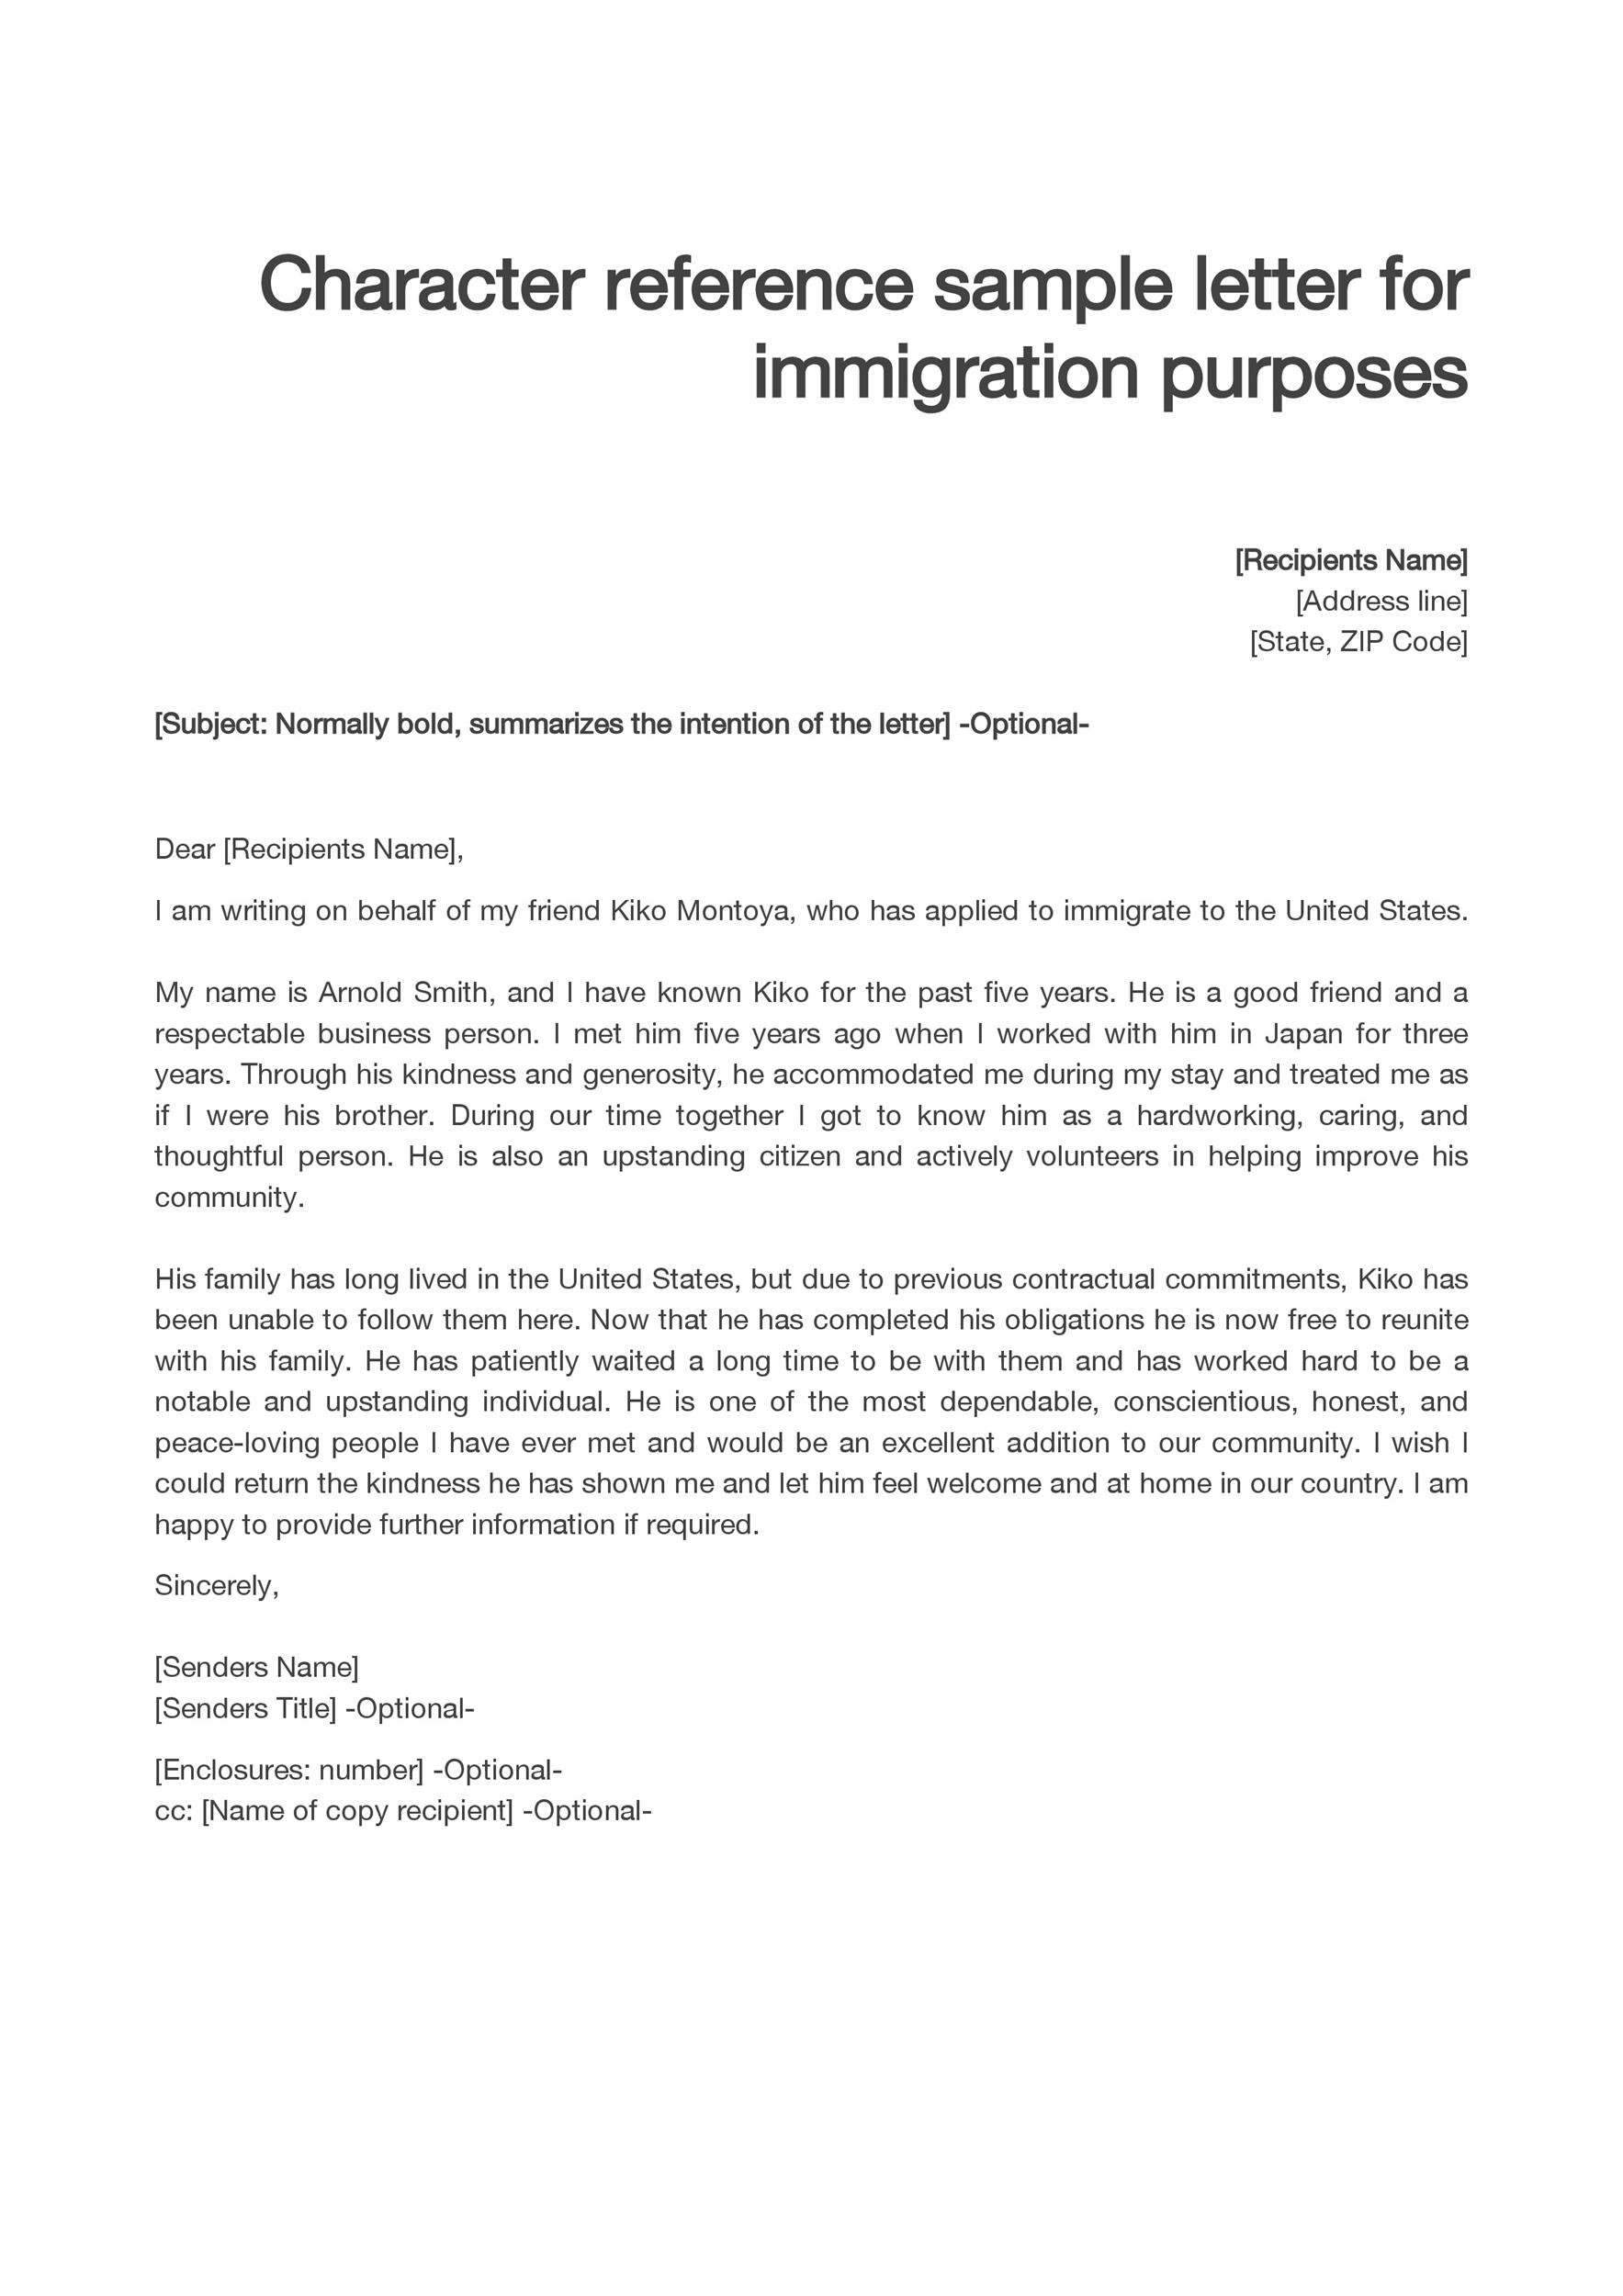 36-free-immigration-letters-character-reference-letters-for-immigration